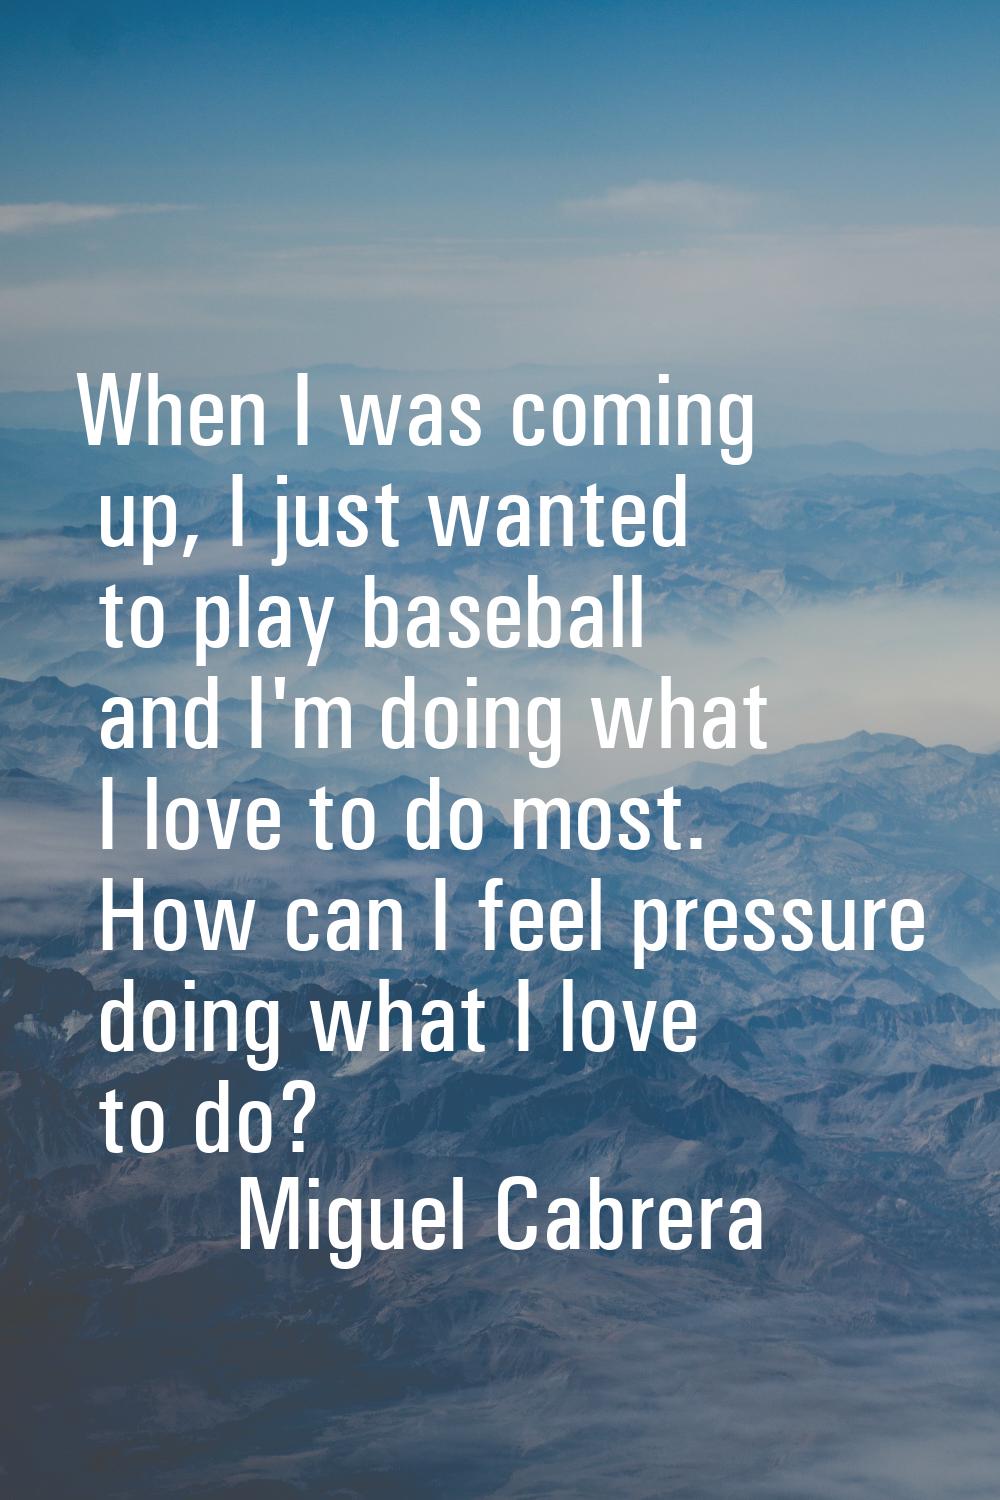 When I was coming up, I just wanted to play baseball and I'm doing what I love to do most. How can 